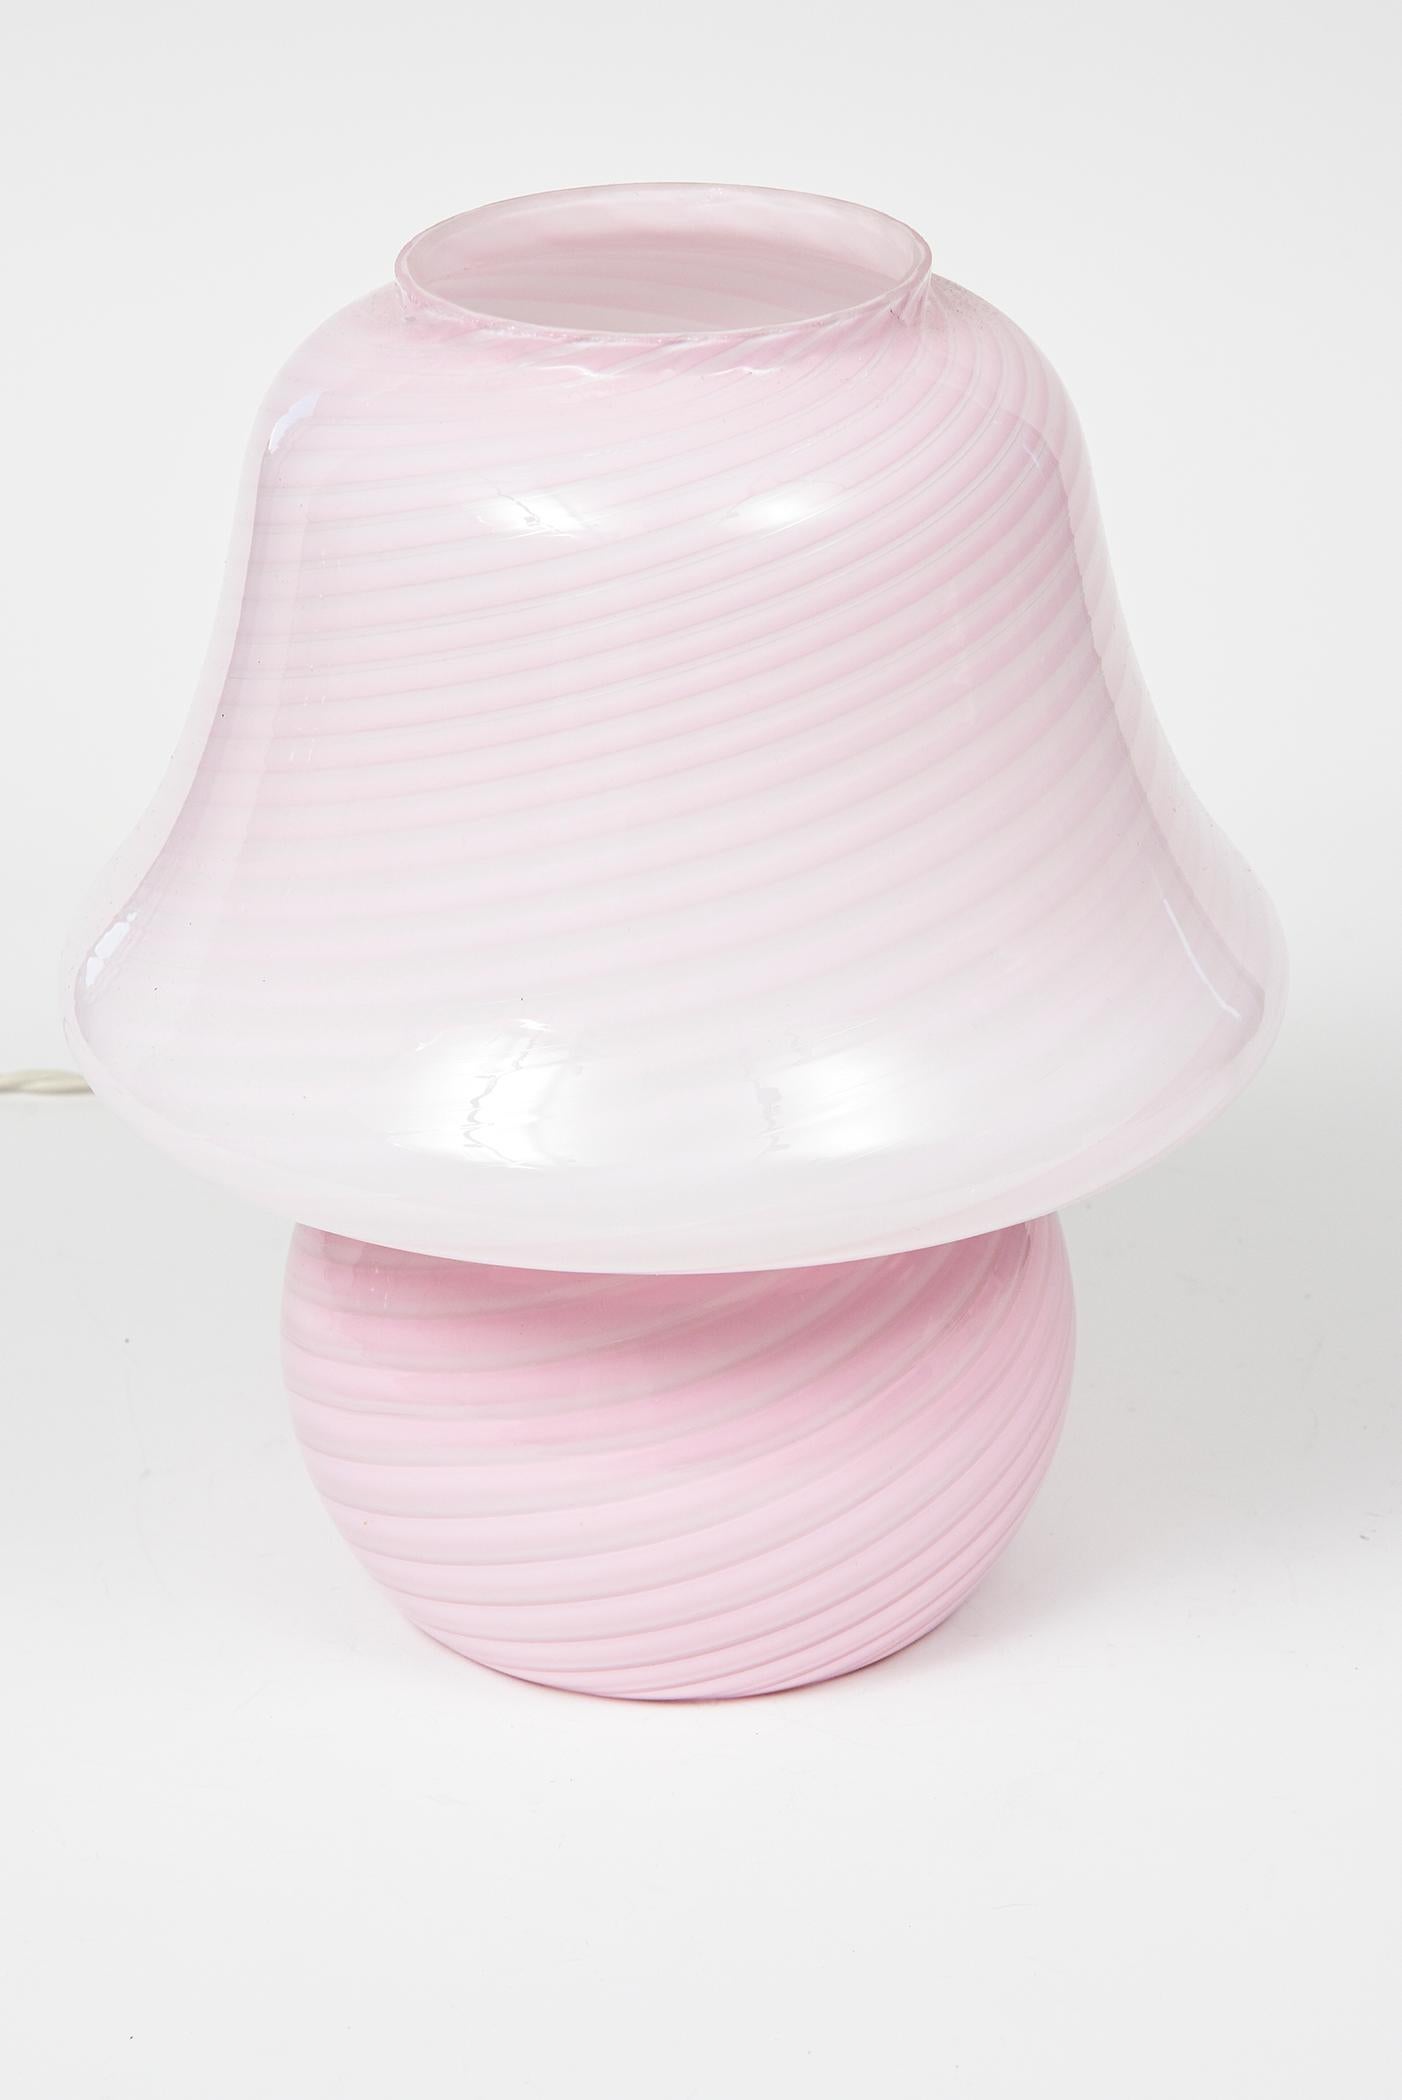 Beautiful pink Murano art glass by Vetri featuring a swirl design. A perfect example of a 1970s mushroom lamp that would look wonderful in any room. This is a small lamp which would be great on a night stand or for mood lighting. It is approximately